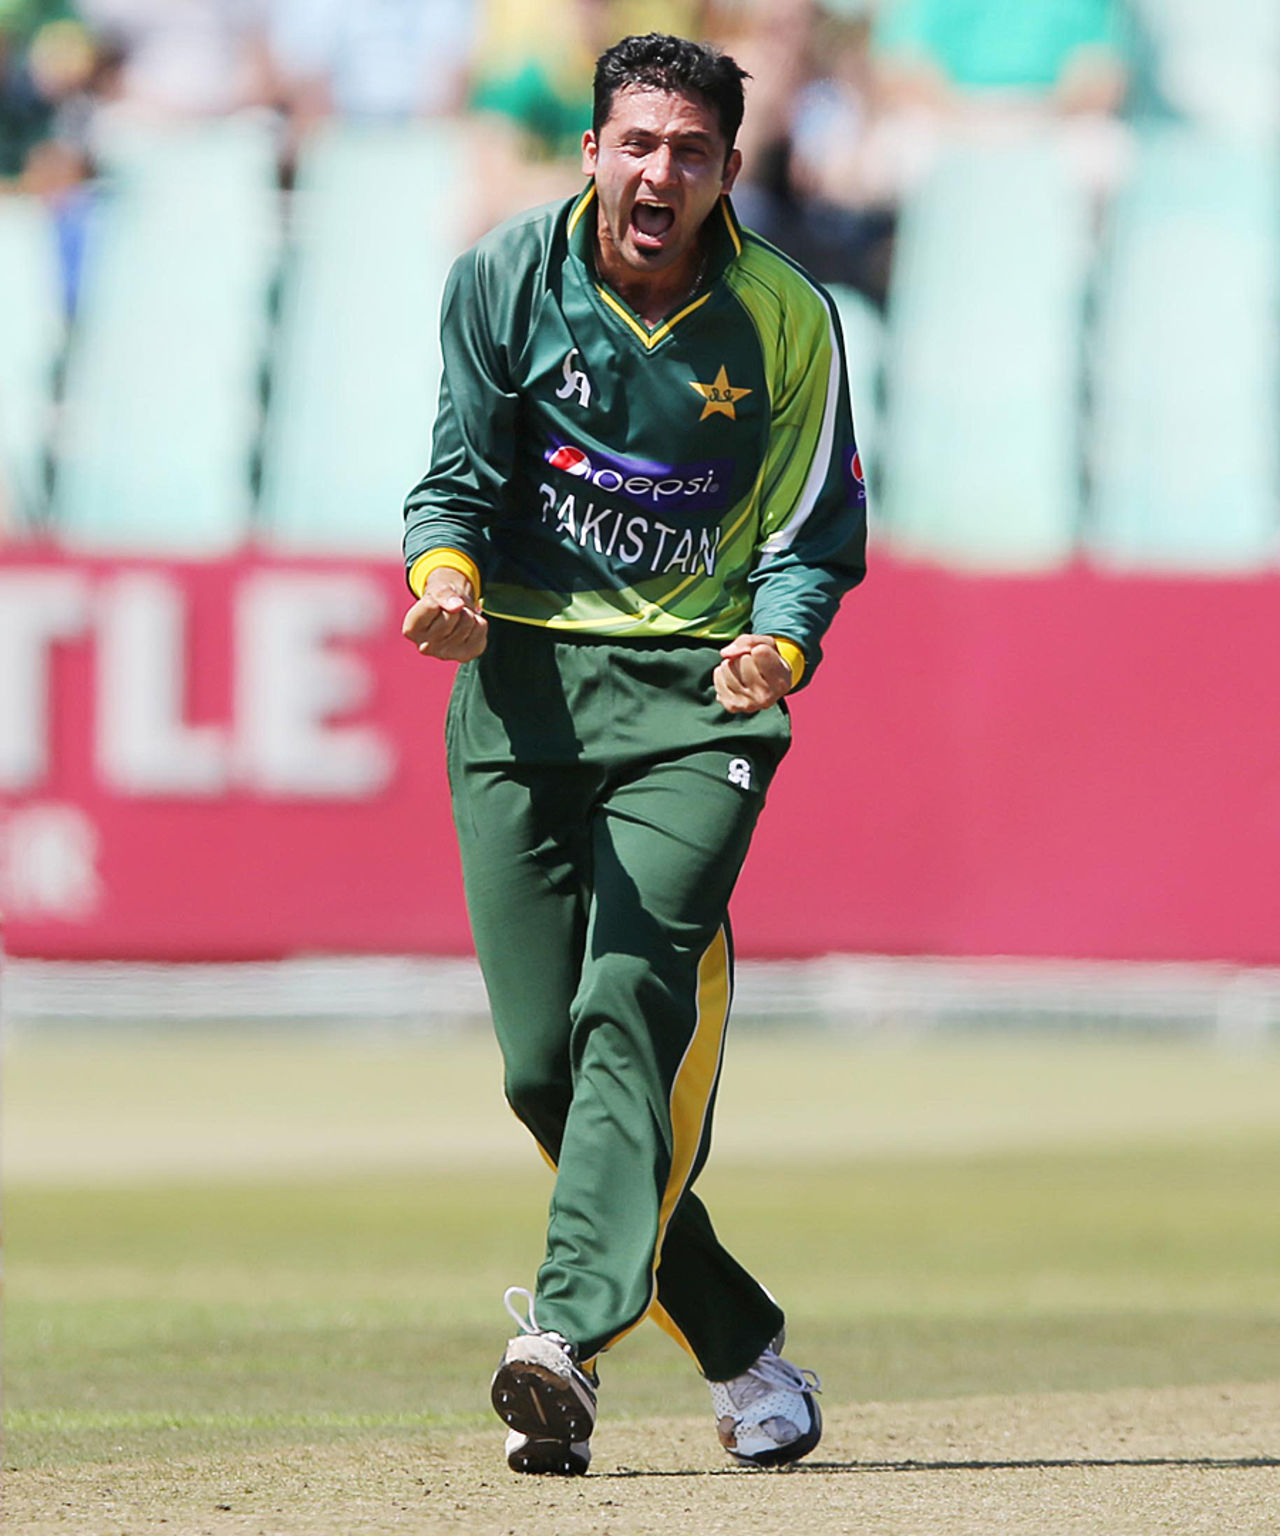 Junaid Khan reacts after taking a wicket, South Africa v Pakistan, 4th ODI, Durban, March 21, 2013